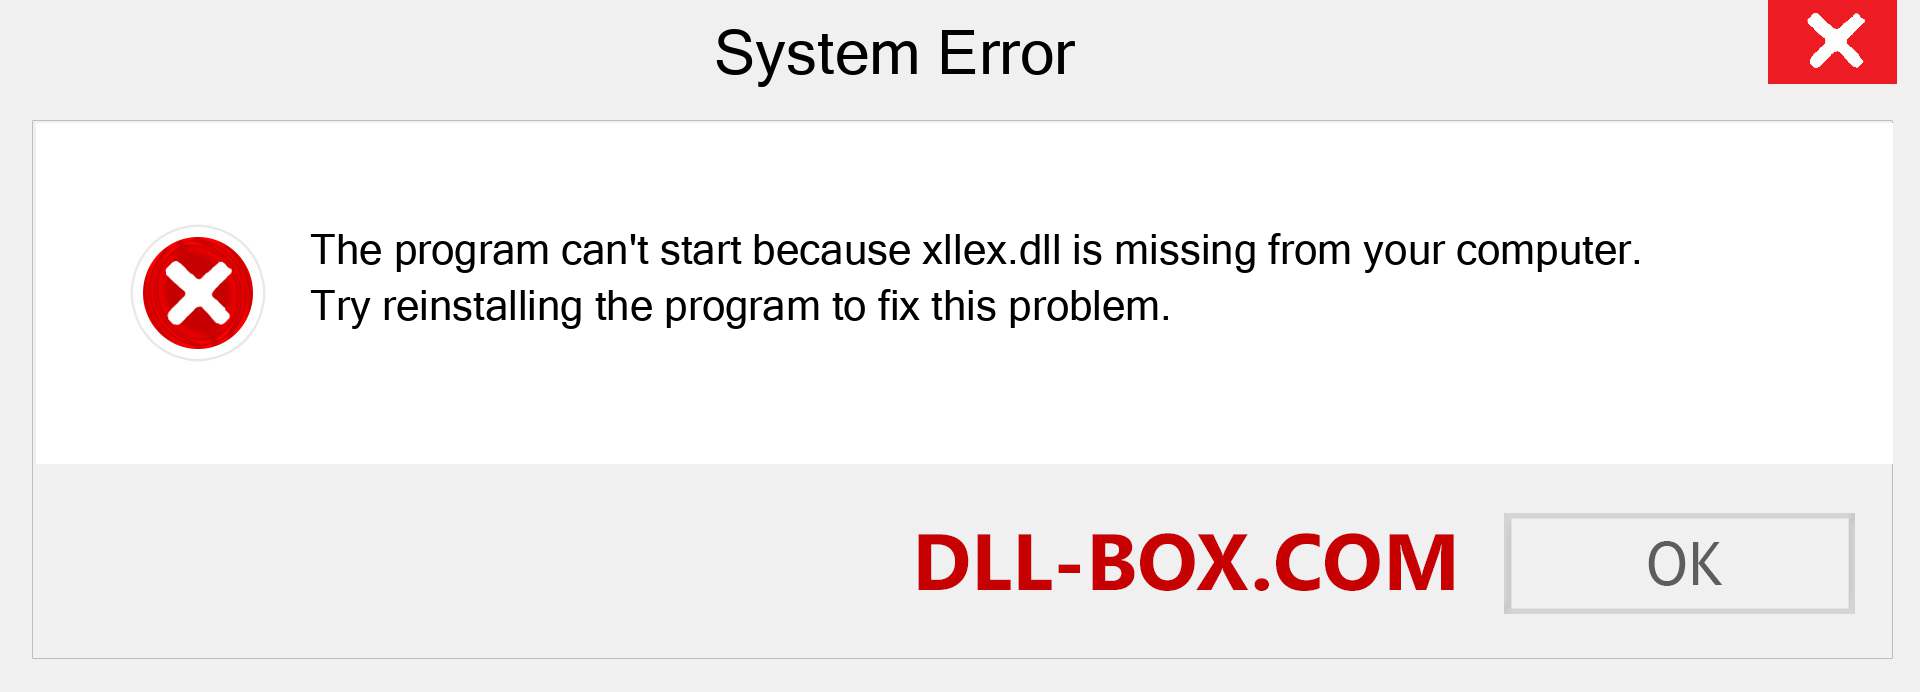  xllex.dll file is missing?. Download for Windows 7, 8, 10 - Fix  xllex dll Missing Error on Windows, photos, images